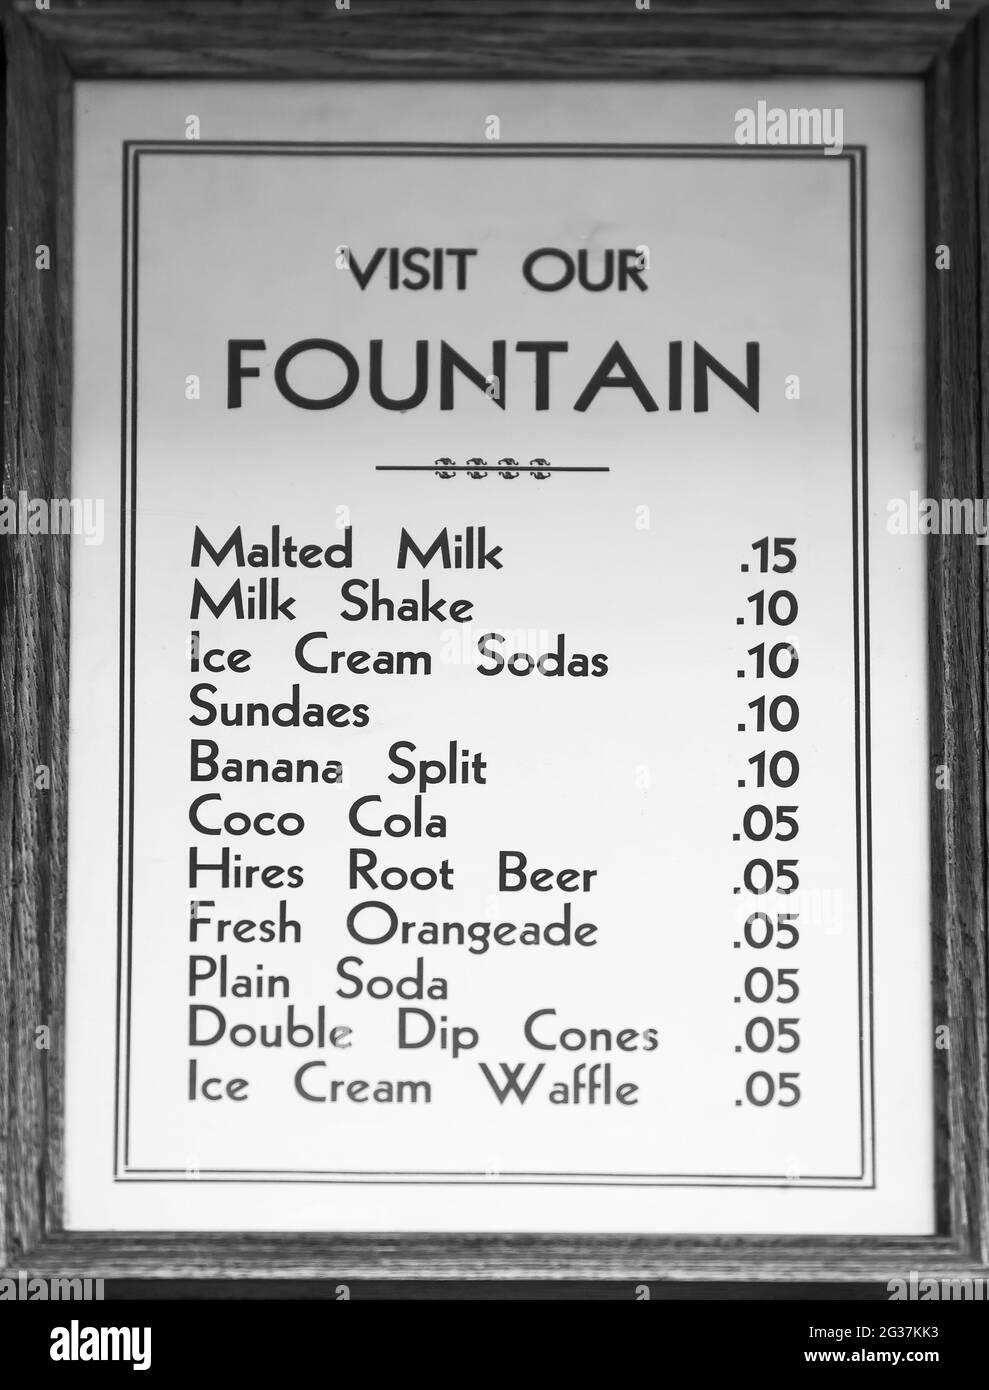 Old, original, retro sign for fountain drinks in the 1950's and 1960's. Stock Photo